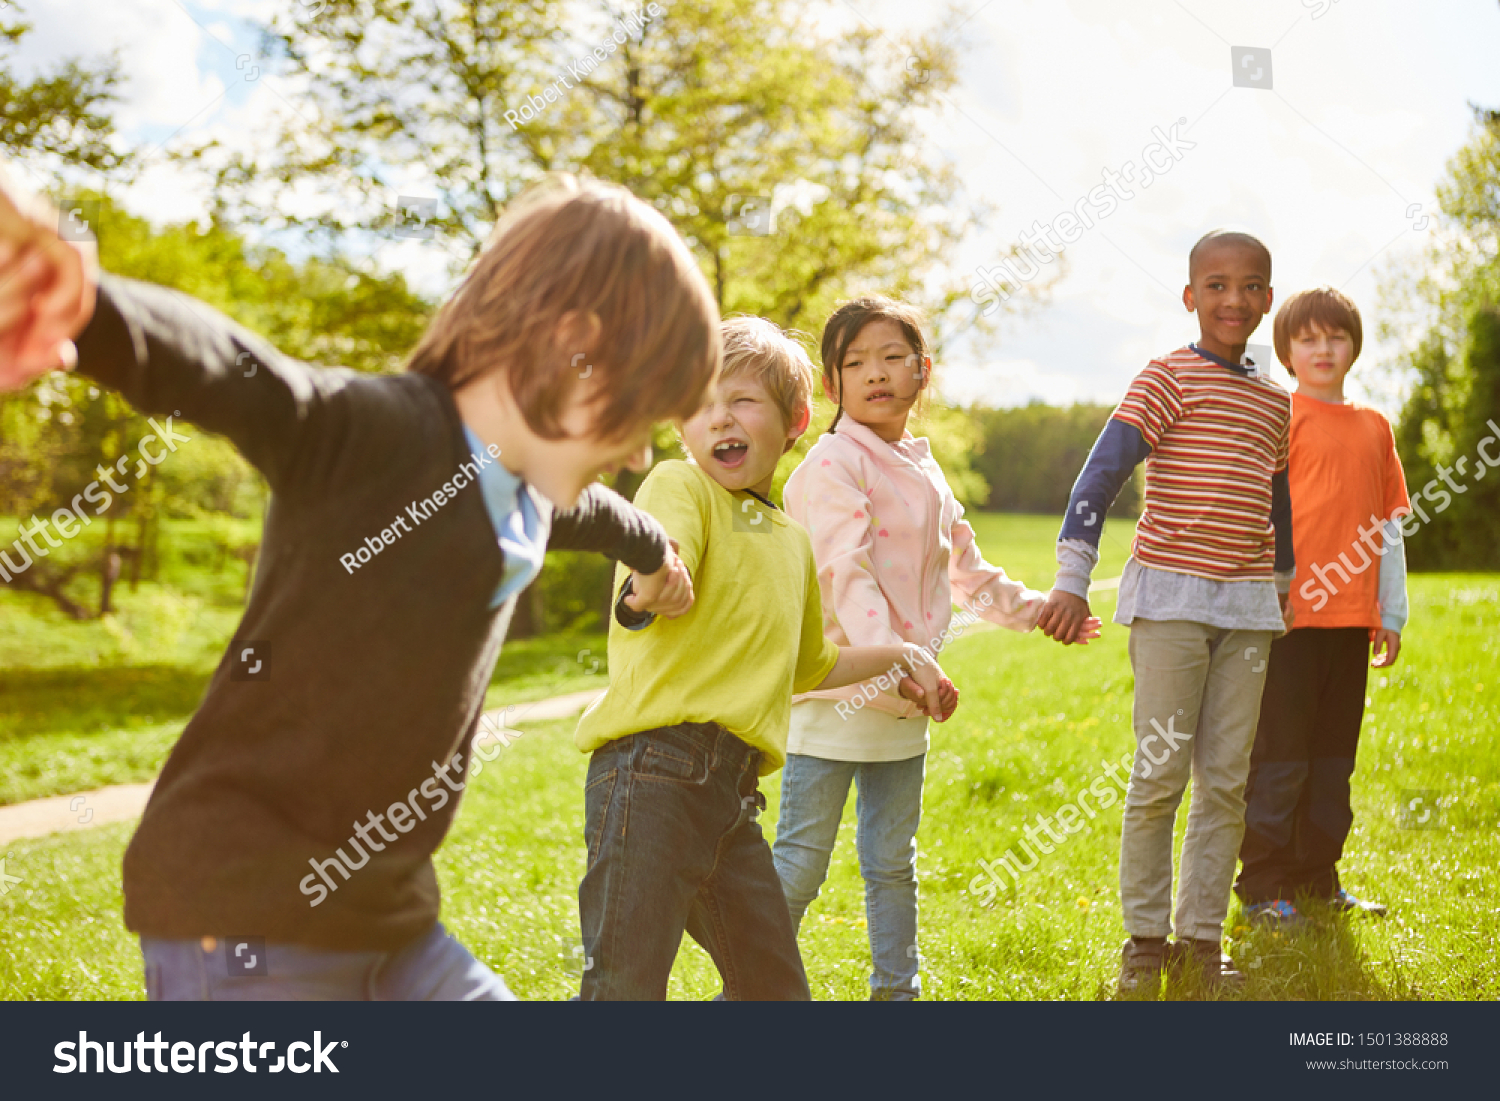 Group of kids holds on to hands in kindergarten or summer camp #1501388888